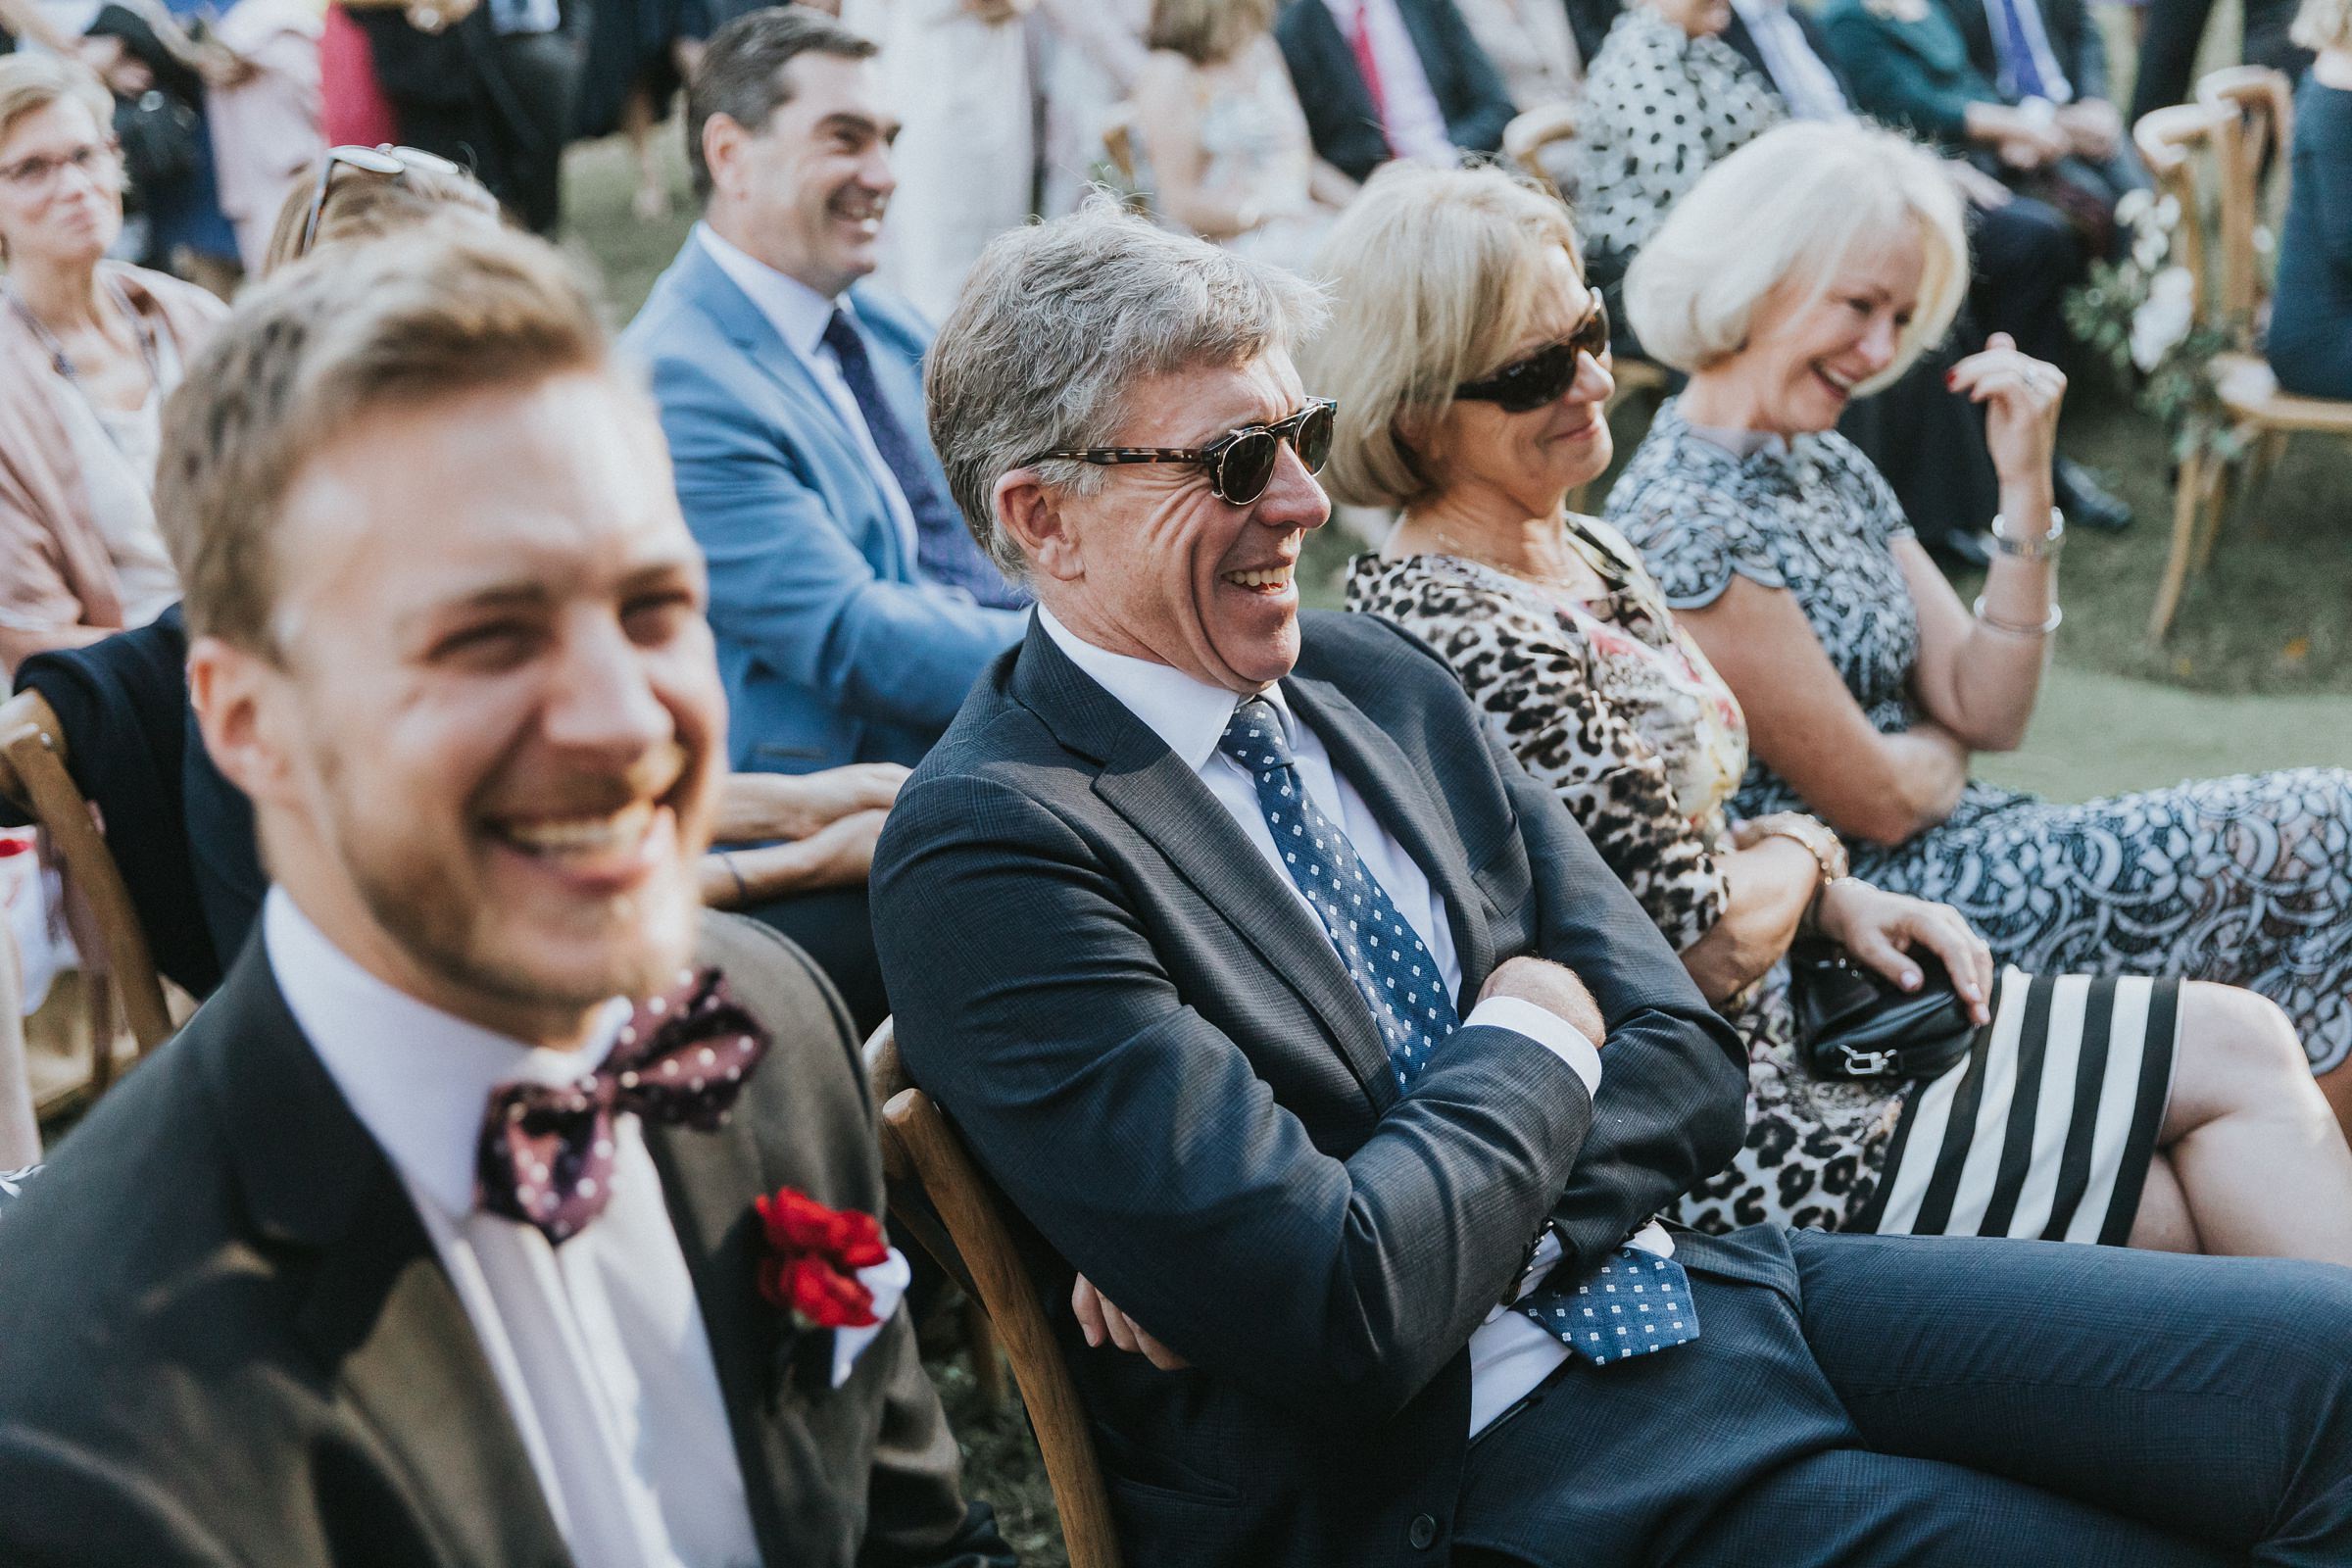 guests erupt in laughter during raw and honest wedding vows